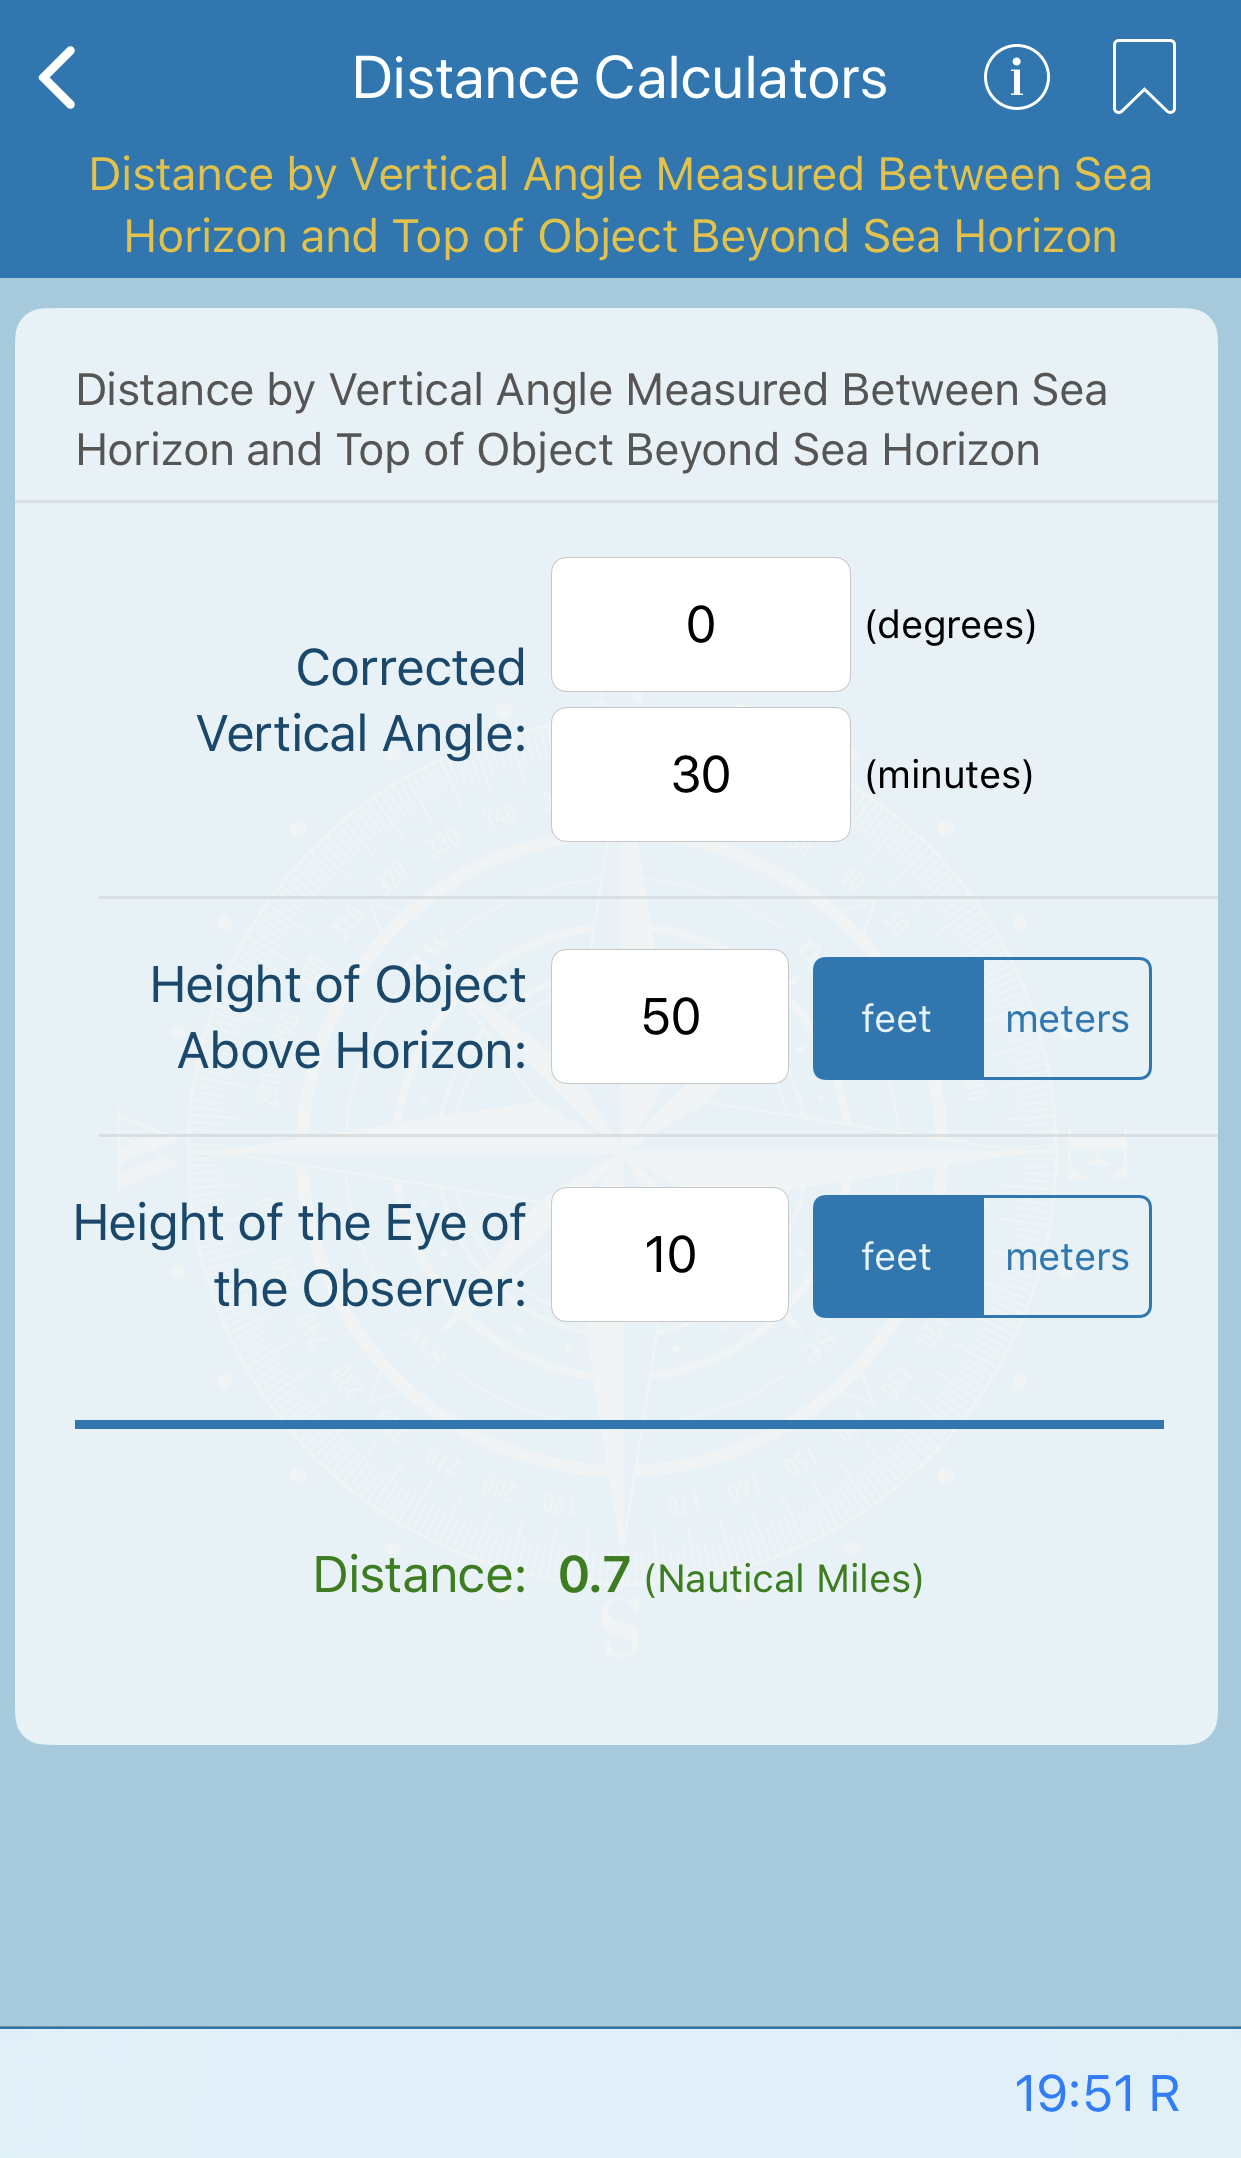 Distance by Vertical Angle Measured Between Sea Horizon and Top of Object Beyond Sea Horizon